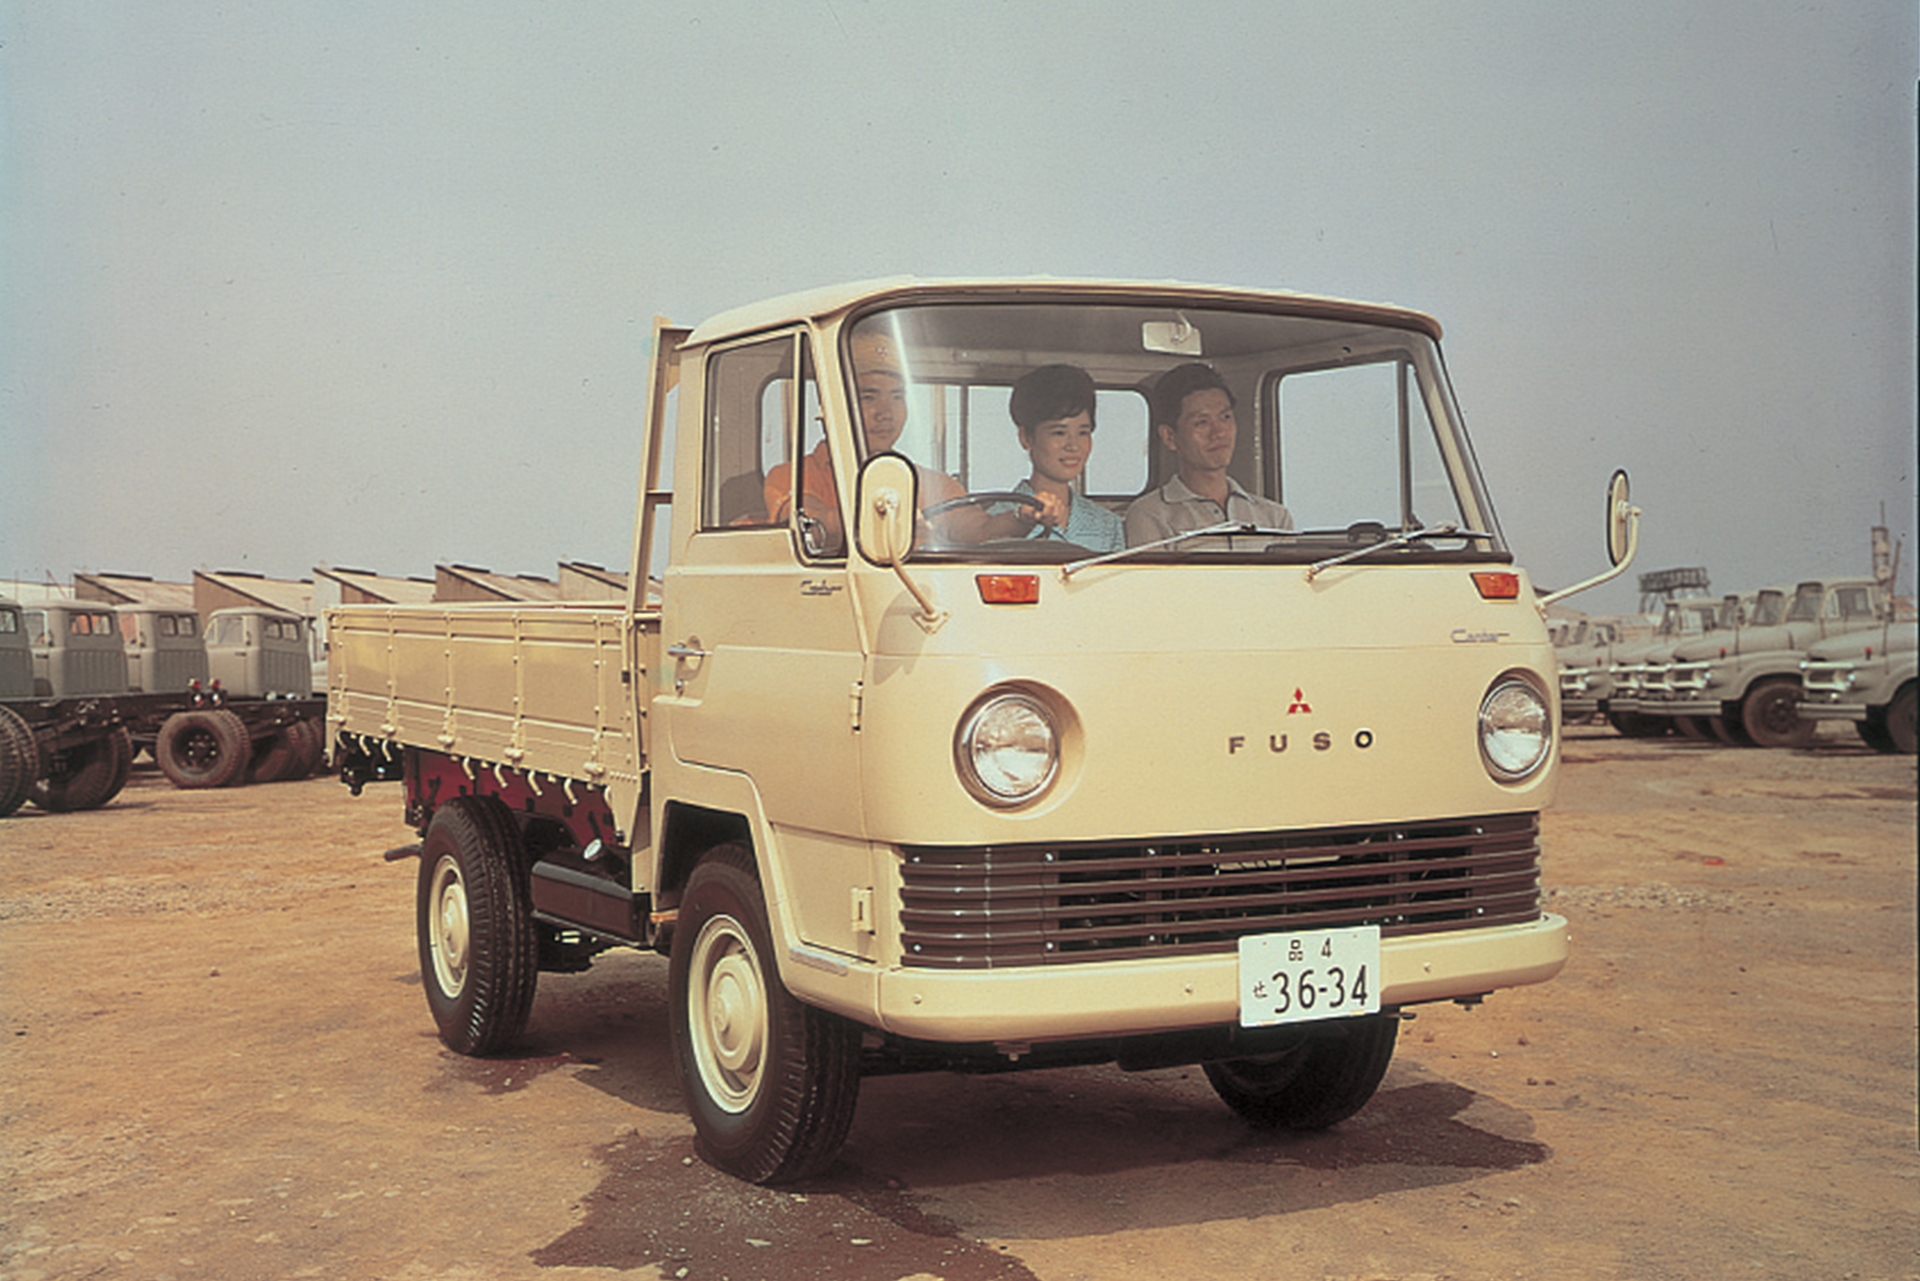 FUSO Trucks celebrates the 60th anniversary of its light-duty Canter truck!